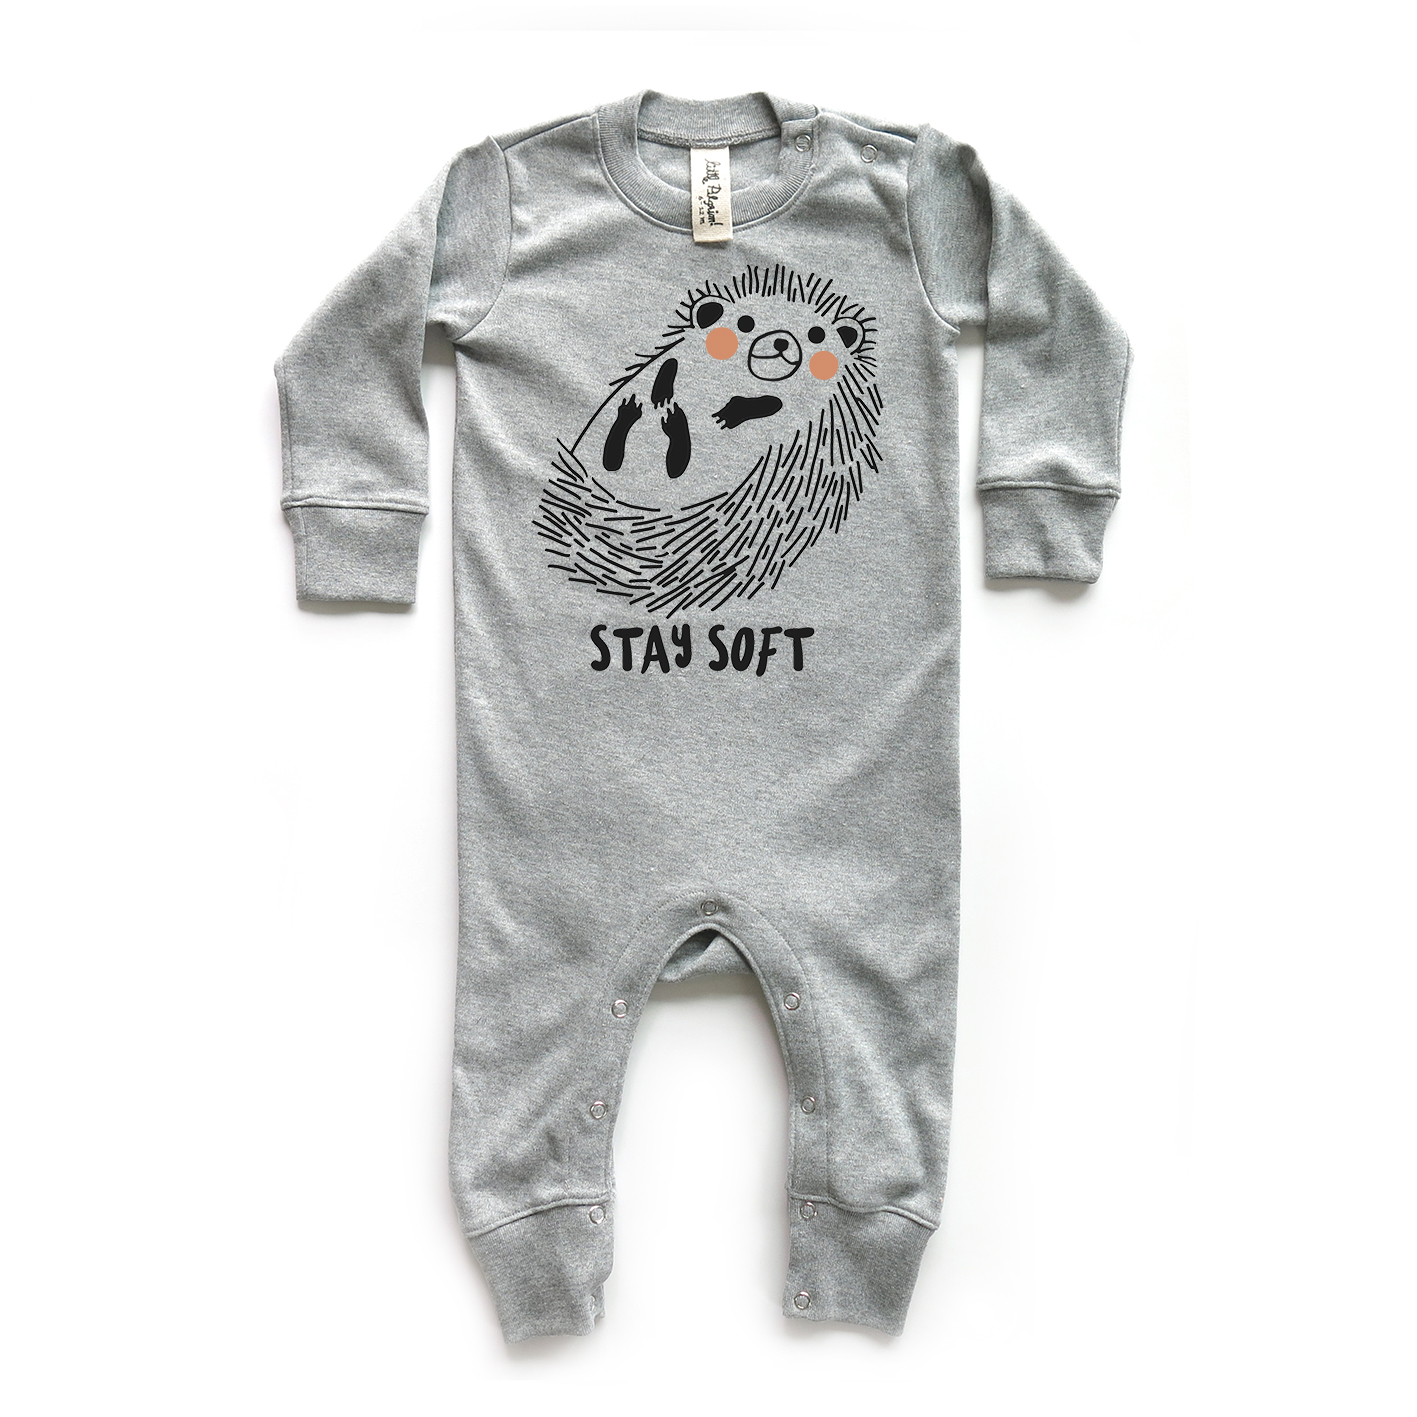 BABY 0-18M [C] LP0222 STAY SOFT PLAYSUIT